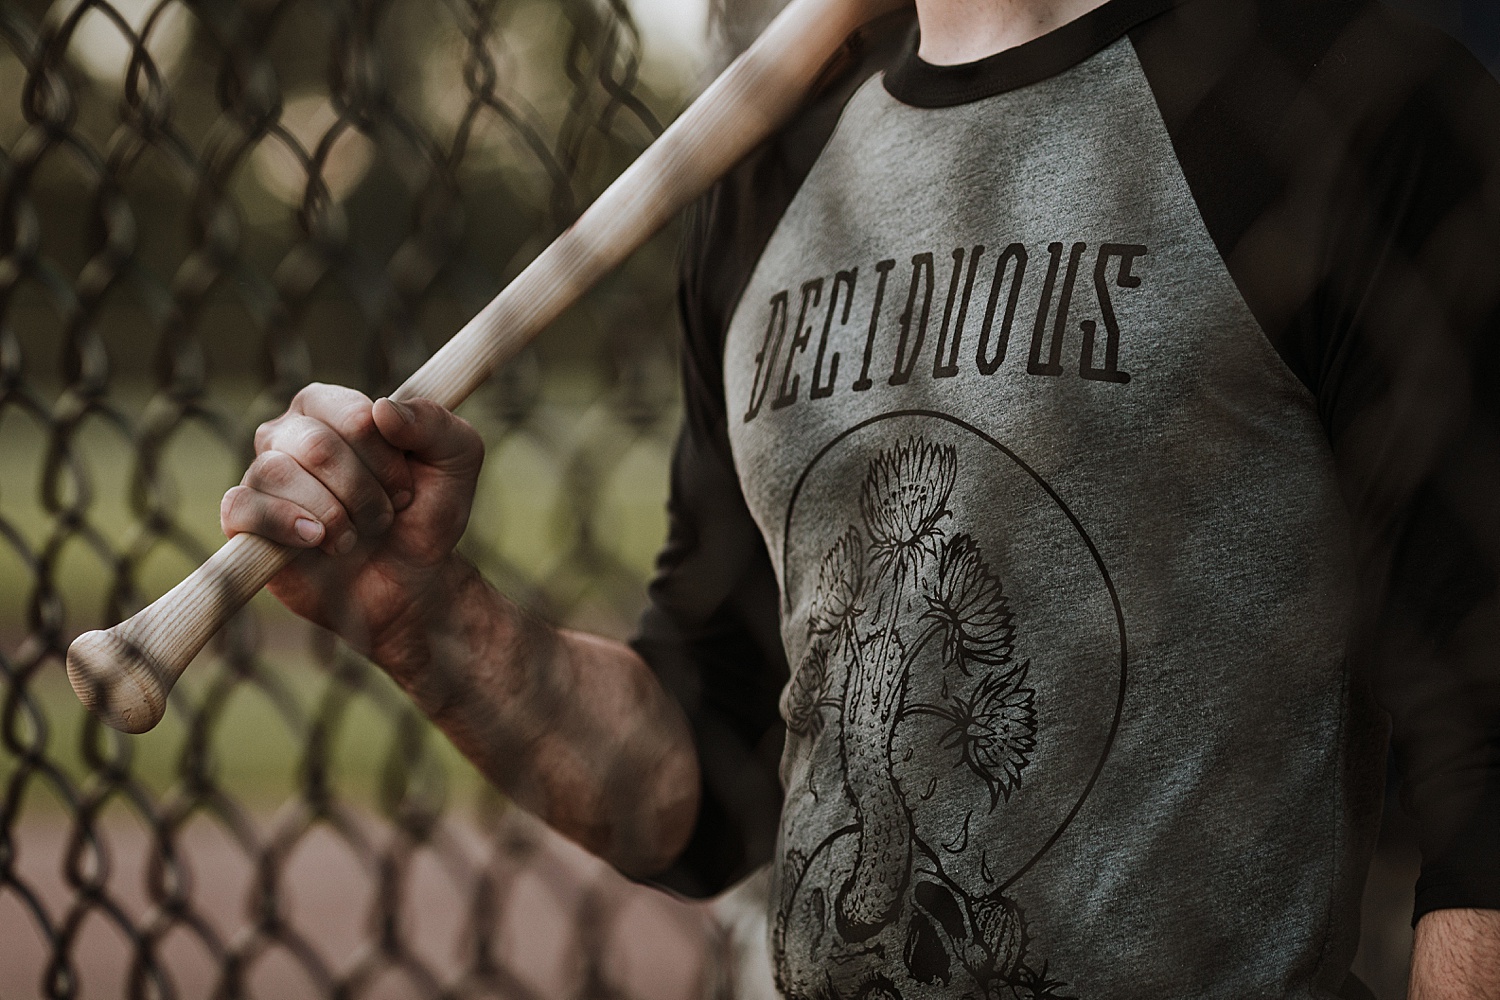 Deciduous Life baseball lifestyle commercial photography shoot Penn State Berks